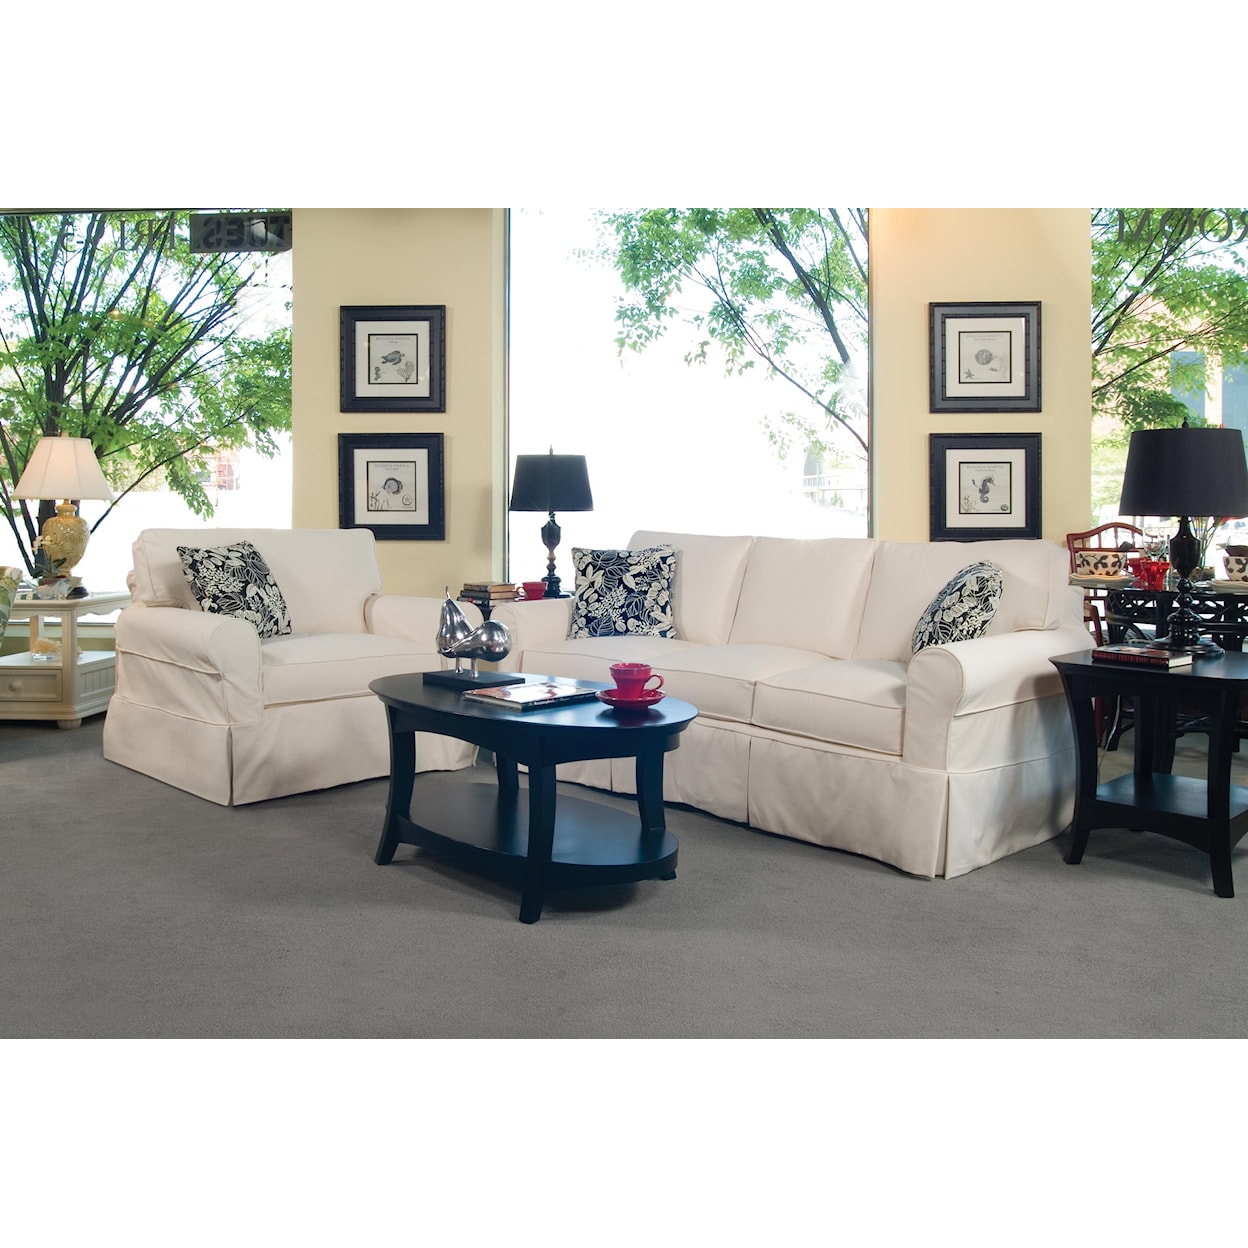 Braxton Culler 728 3-Seater Stationary Sofa with Slipcover